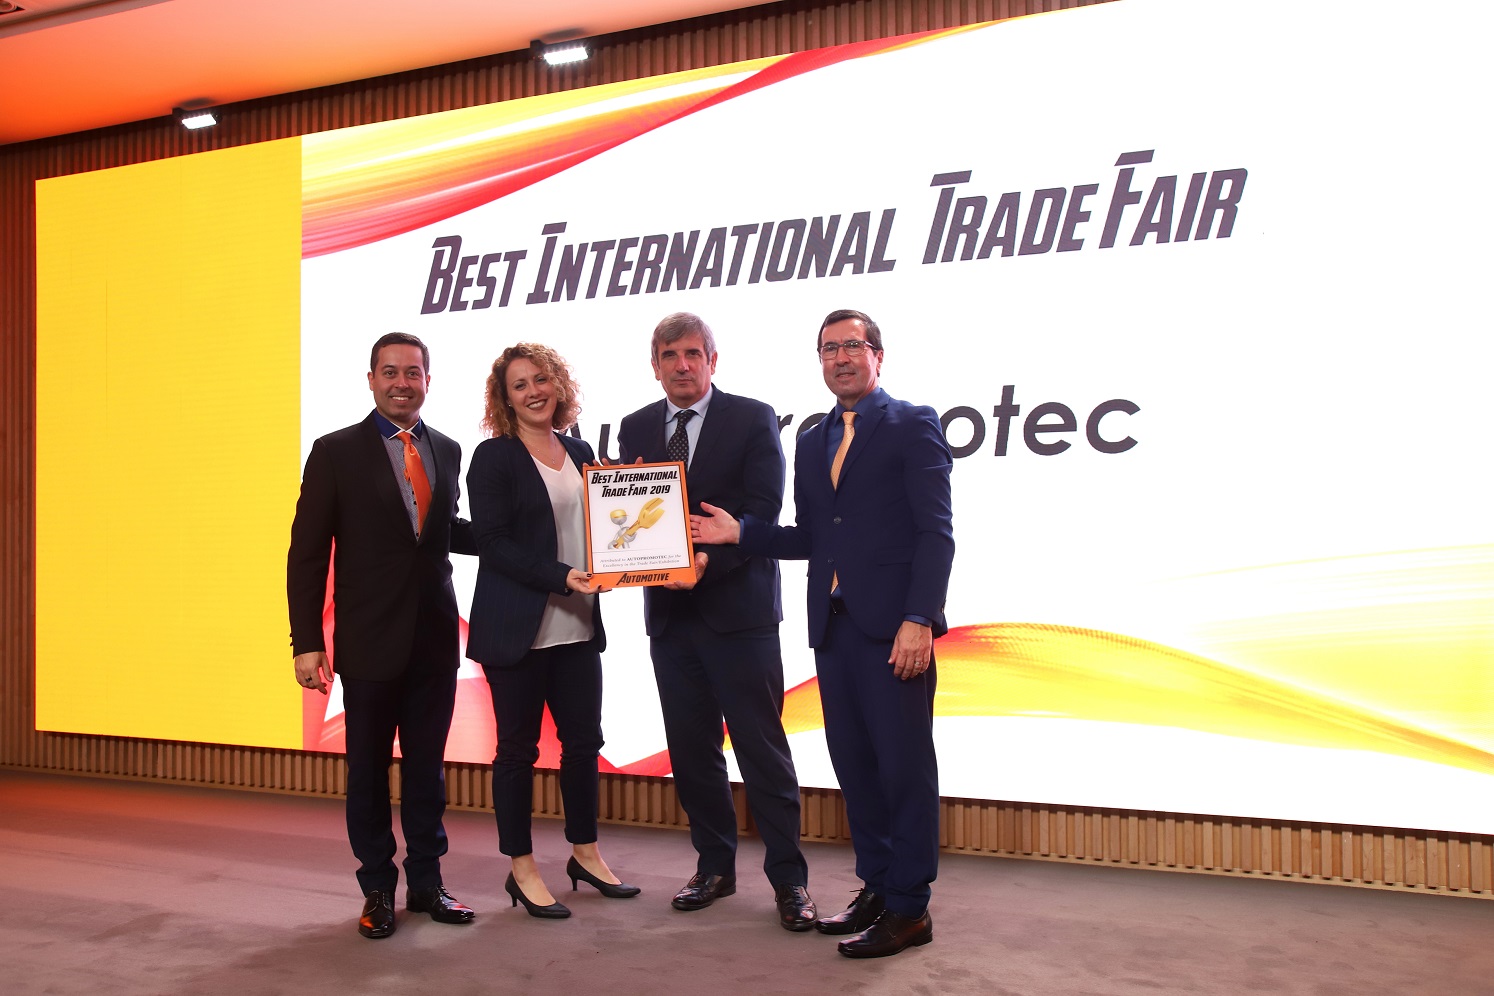 The award was given by Automotive Magazine in Lisbon. The reason: "Quality and efficiency in the organisation of the event and in the reception of exhibitors"